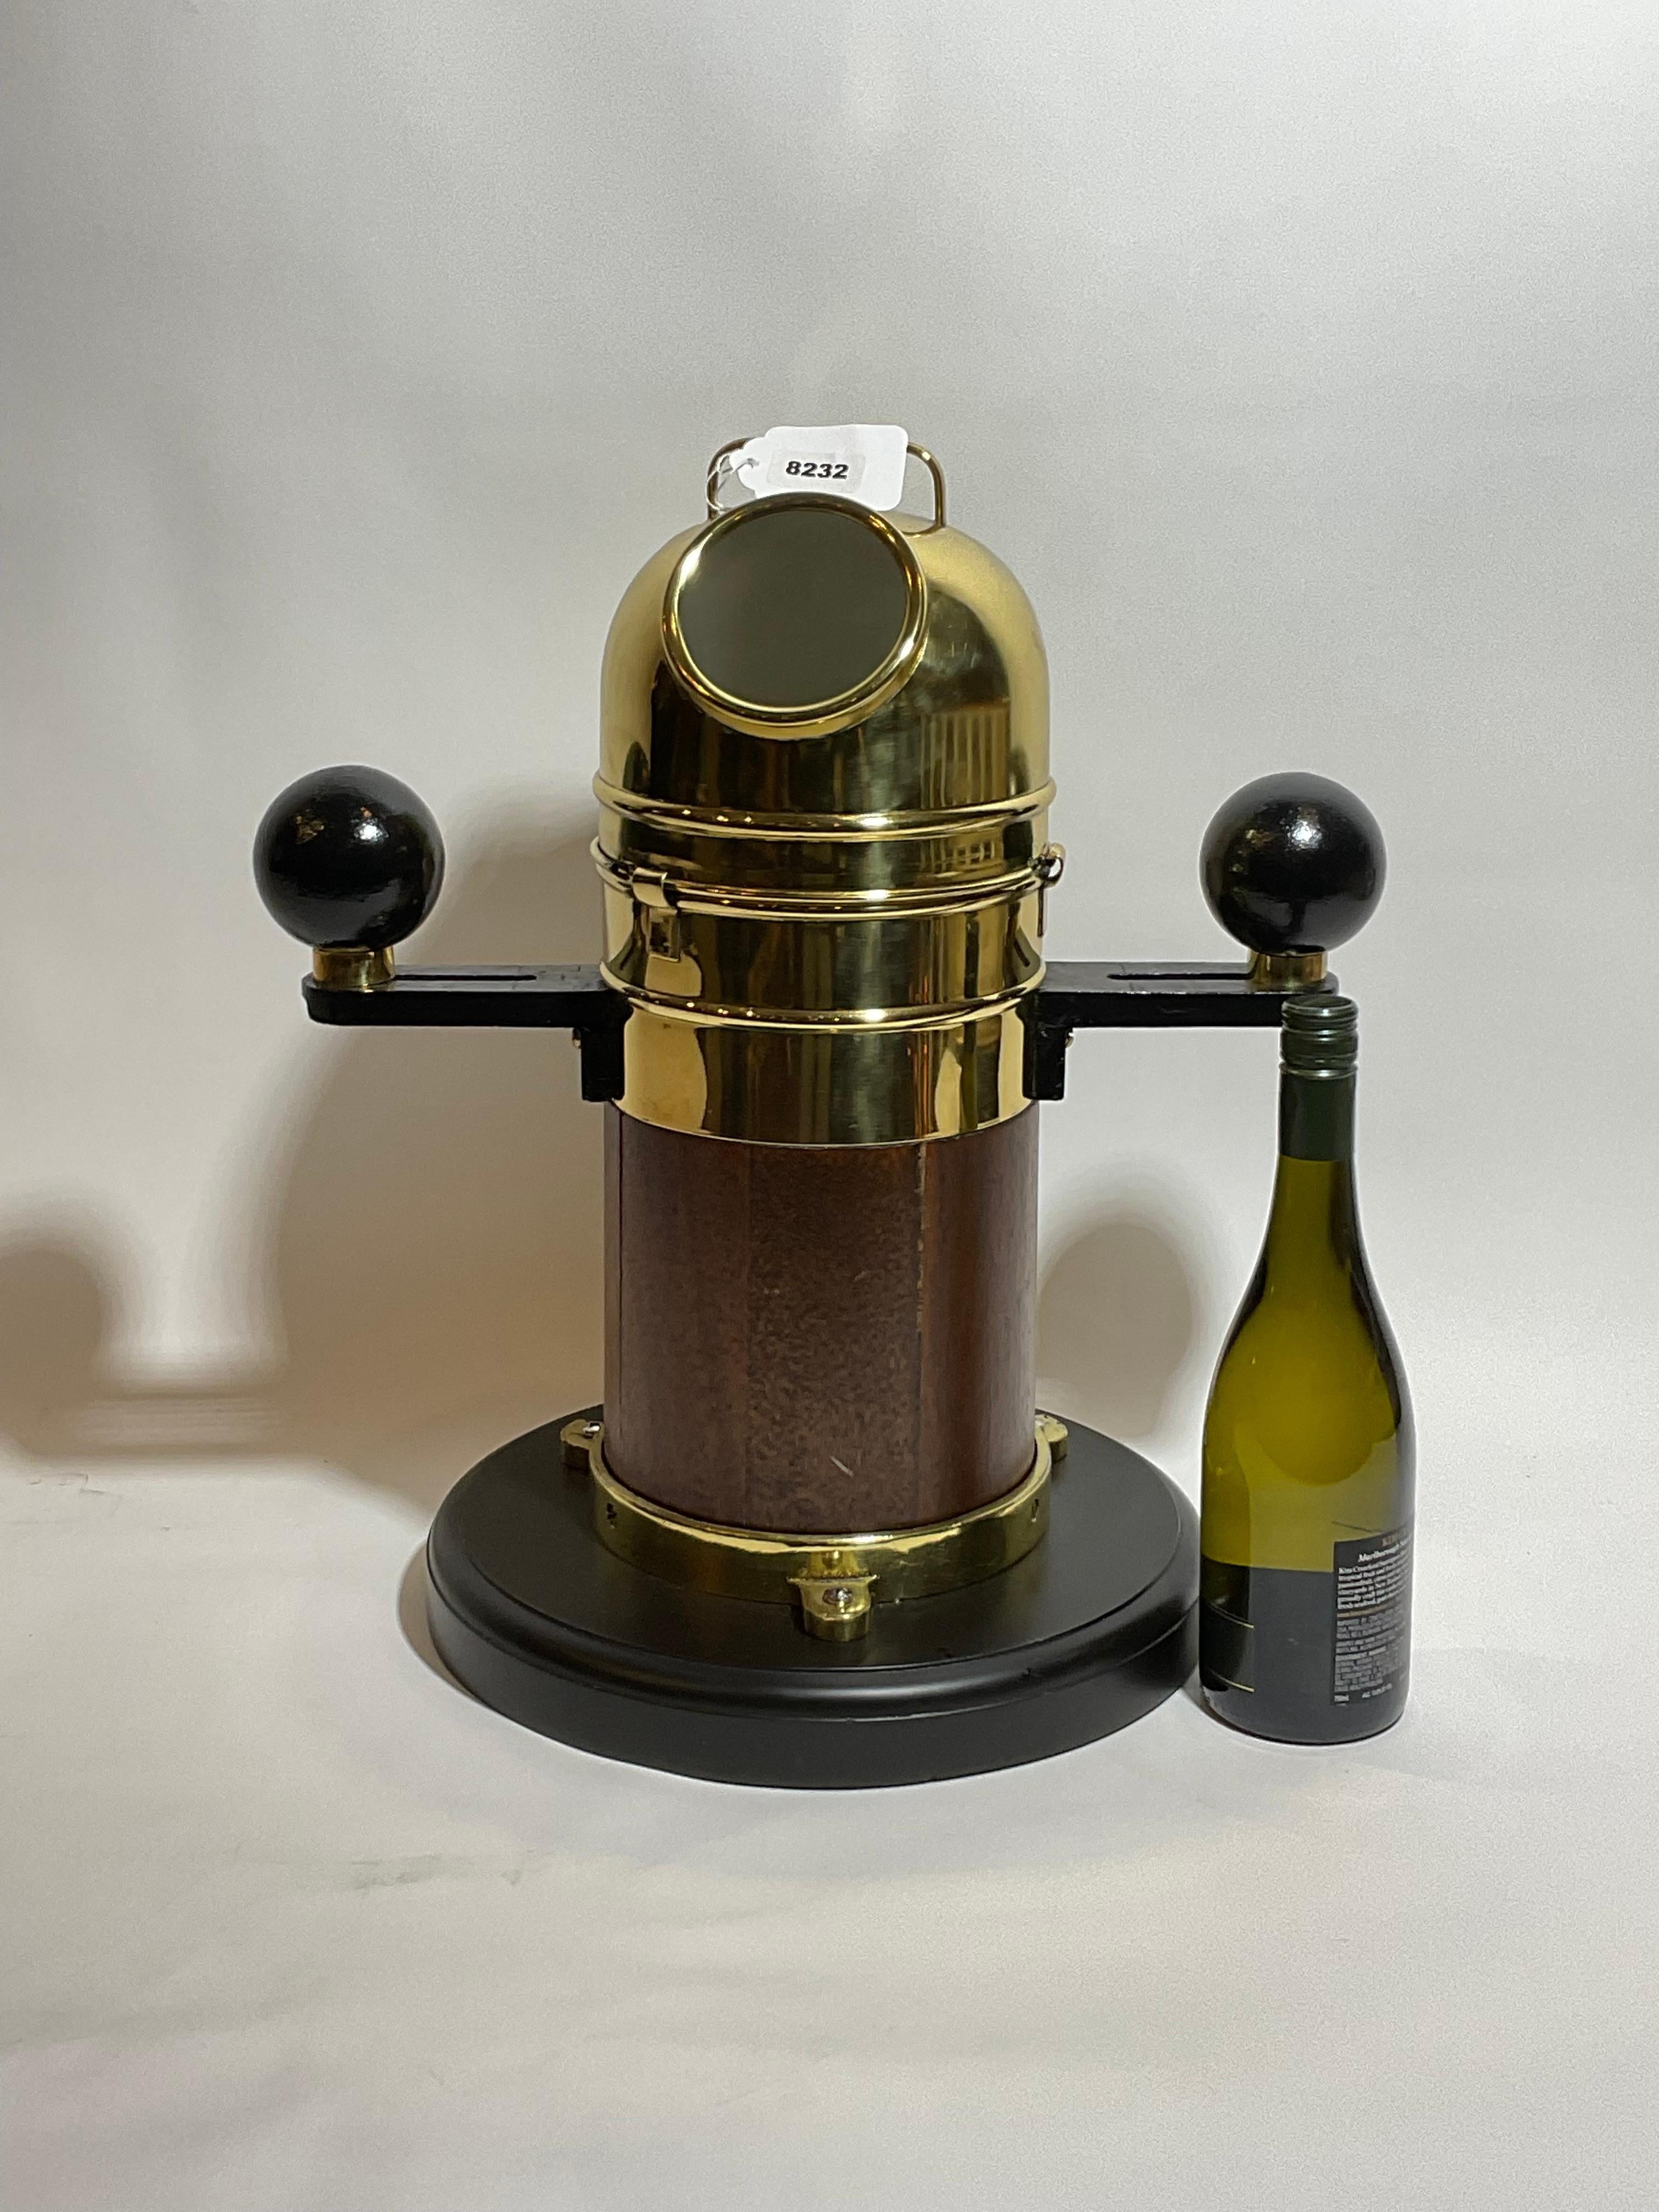 Small boat binnacle with wood base, brass compass ring and hood. Compass is engraved 